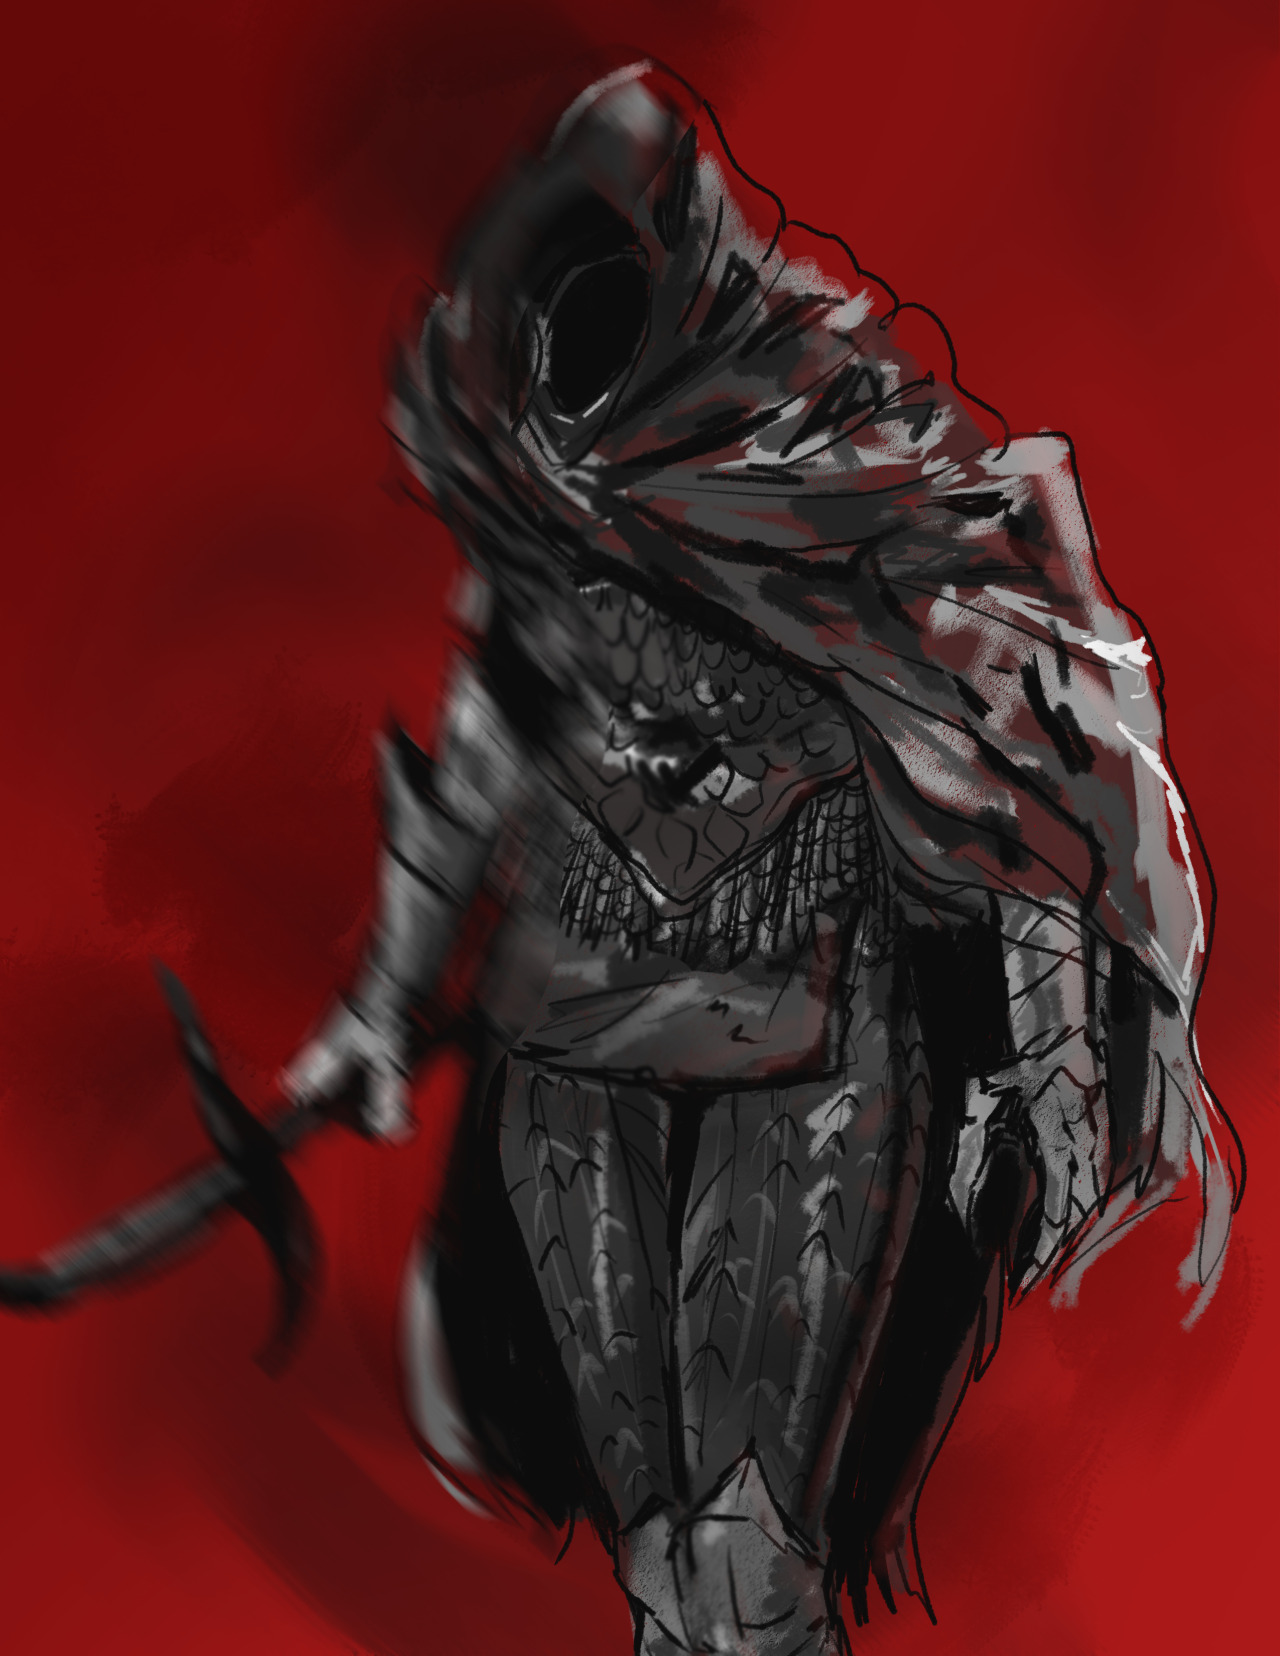 Hey so the Black Knife Assassins are some of the sexiest enemies in ELDEN RING , no you cannot change my mind.